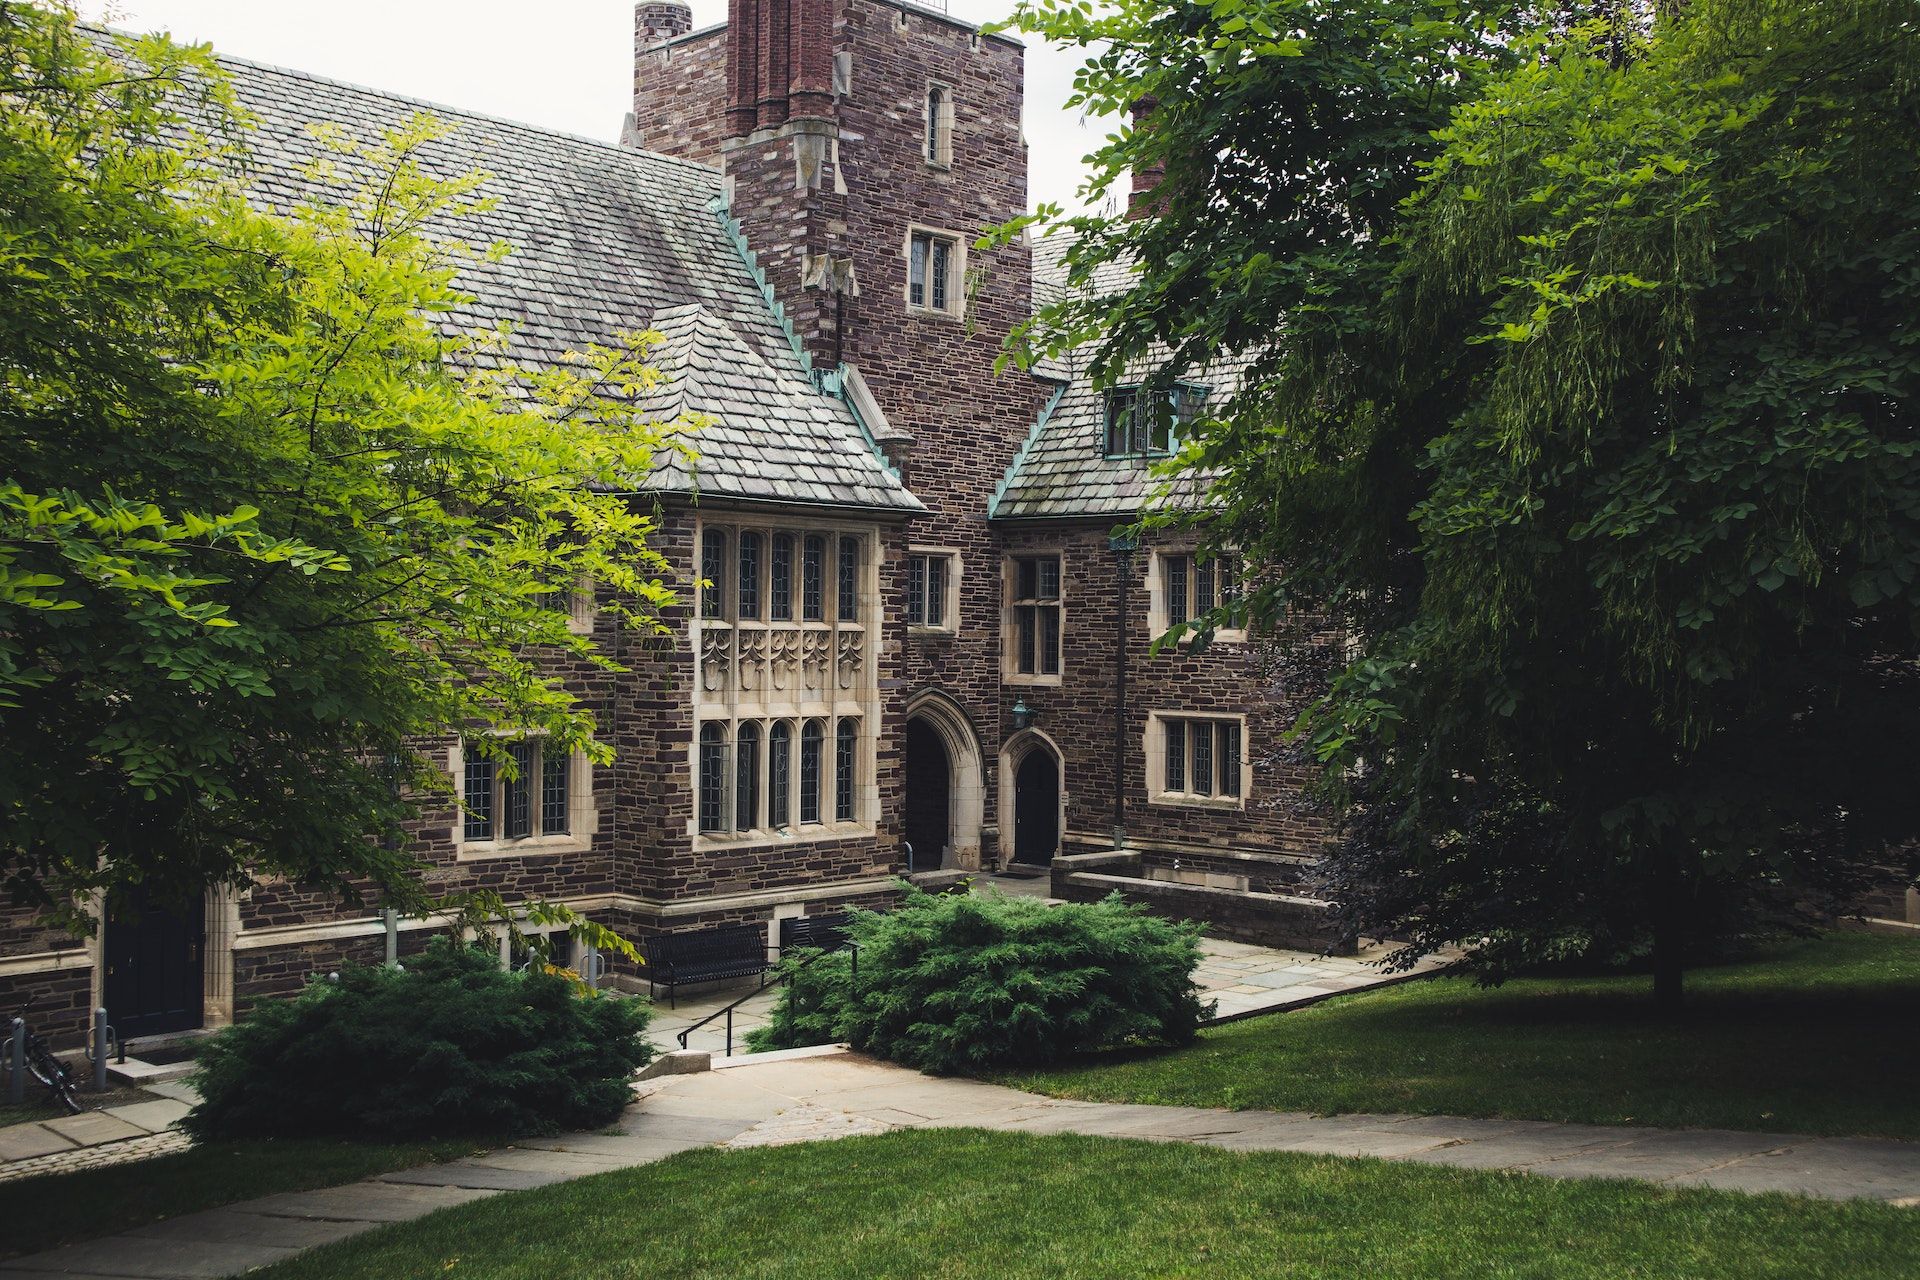 A building in Princeton University